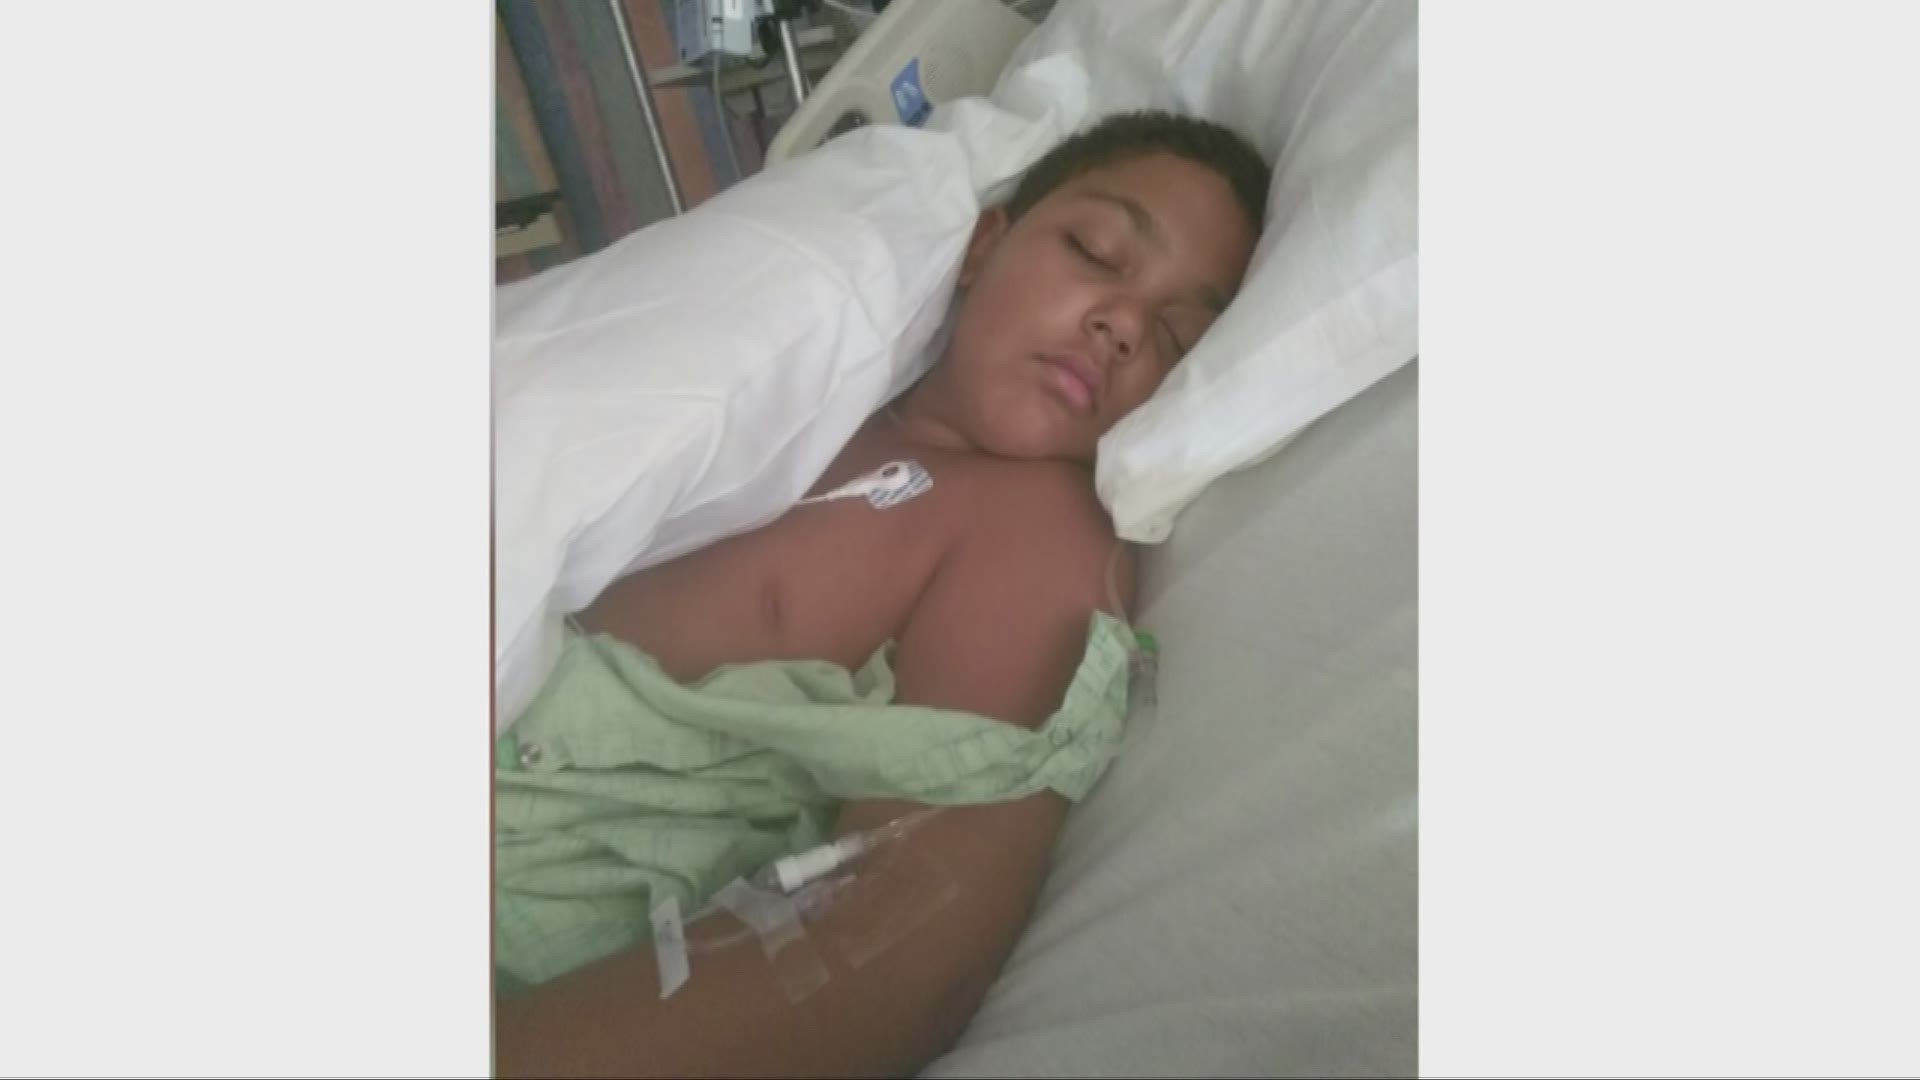 A year and a half after Shynelle Jones' son, Jayden, got severe heat stroke during football practice at Stockton's Lincoln High School, and spent 5 days in the hospital, including two in intensive care, she's now caught up in a legal battle with the district over the incident.